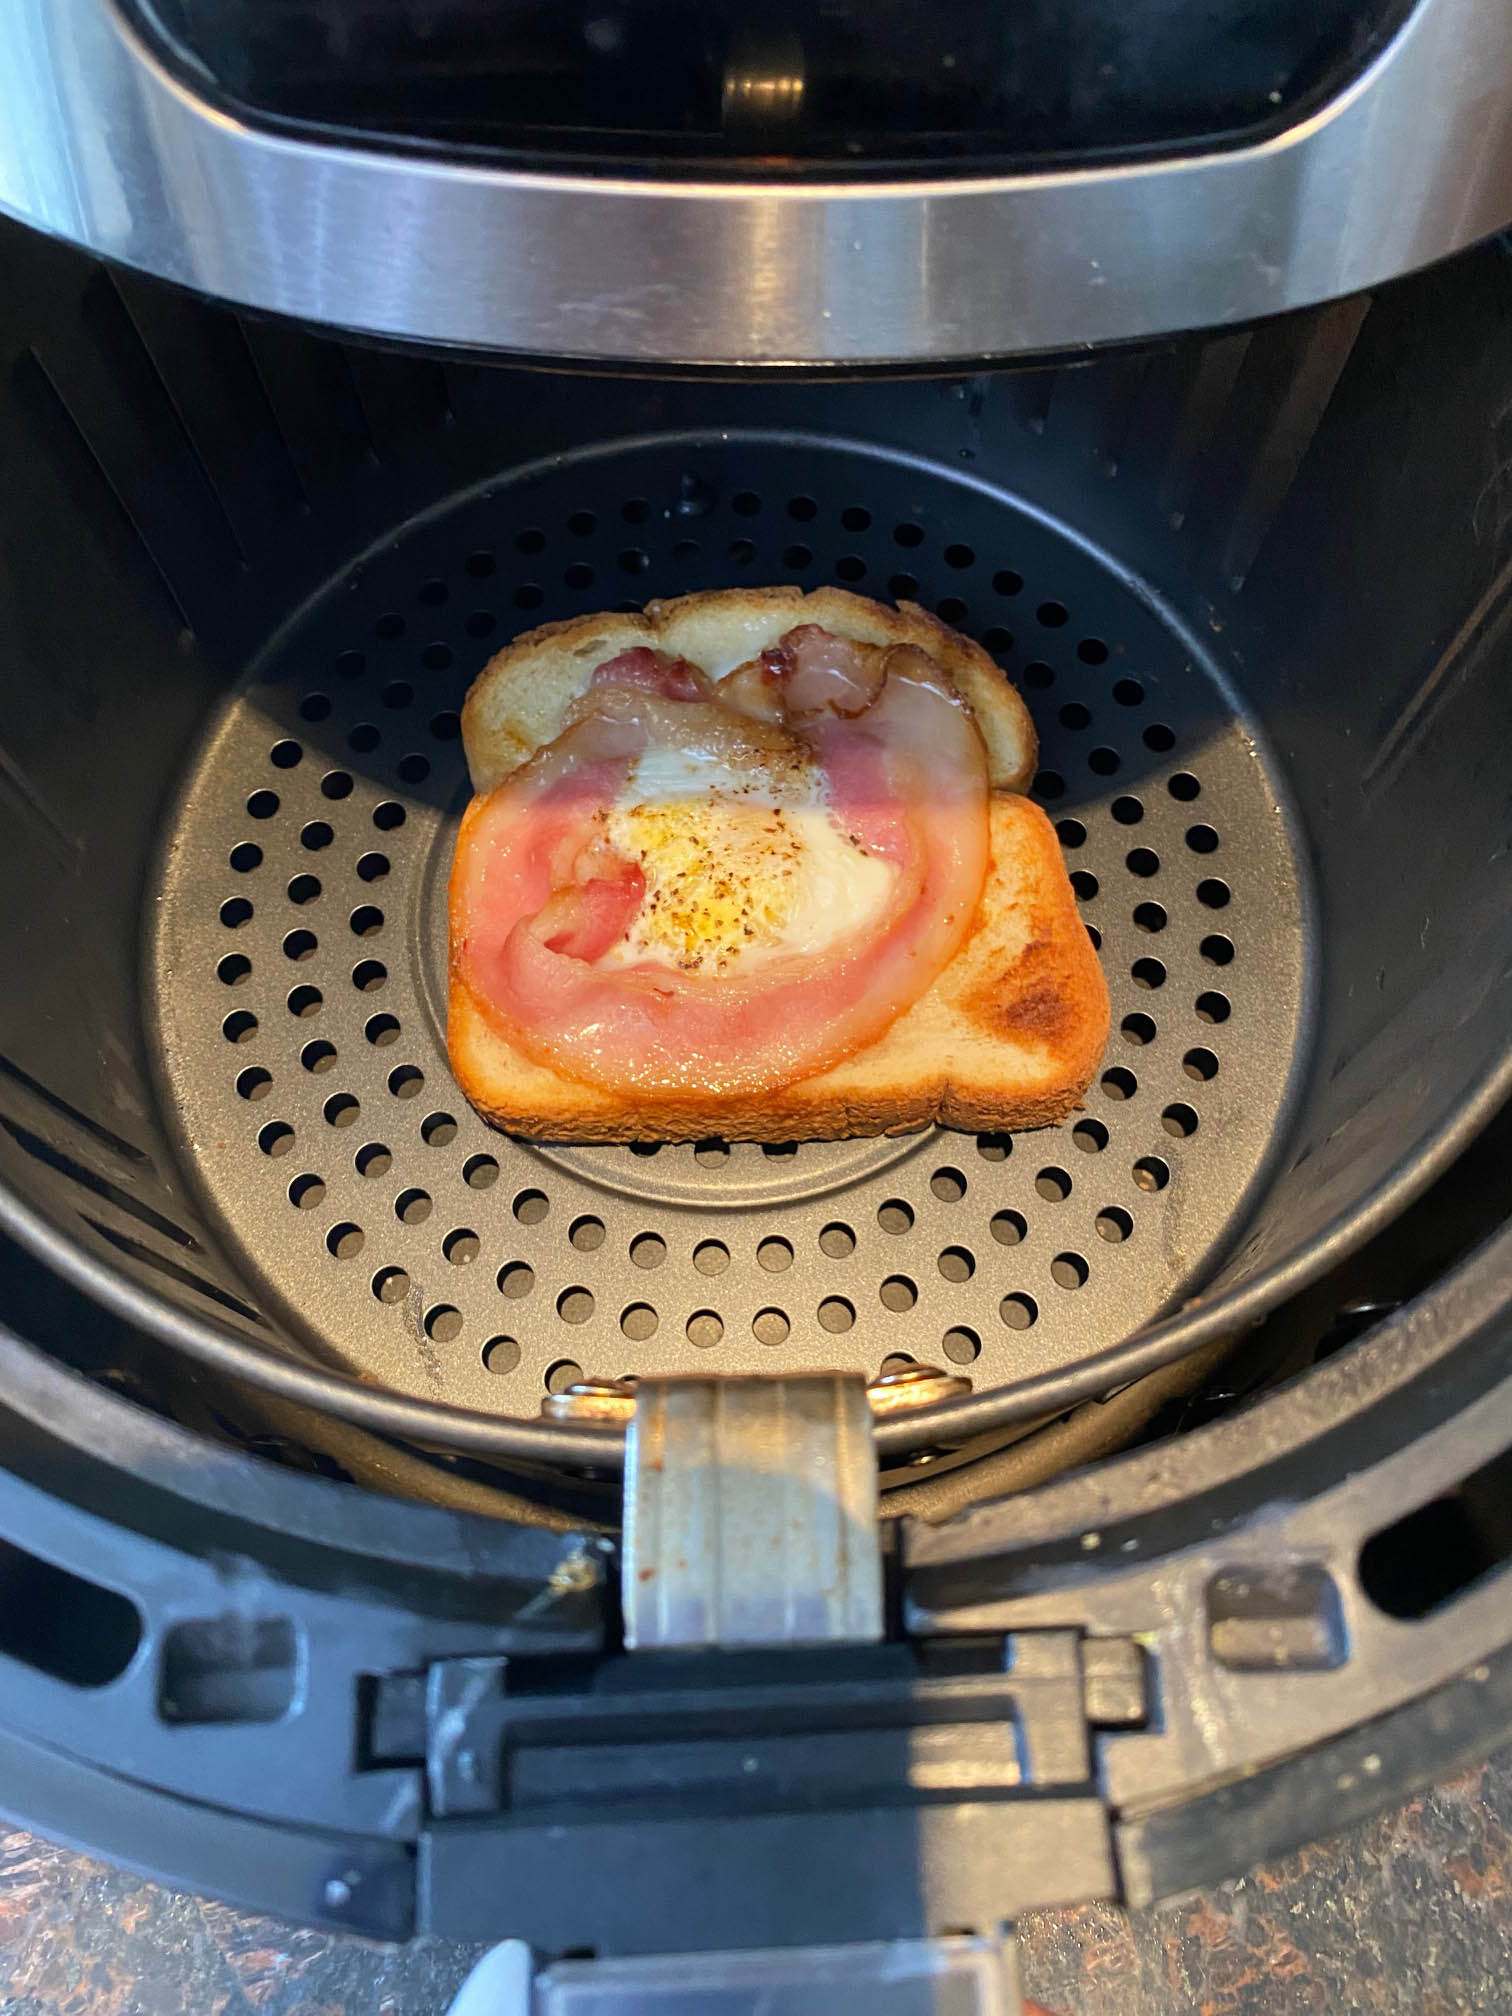 Toast with soft bacon and over easy egg in the basket of tabletop convection oven.